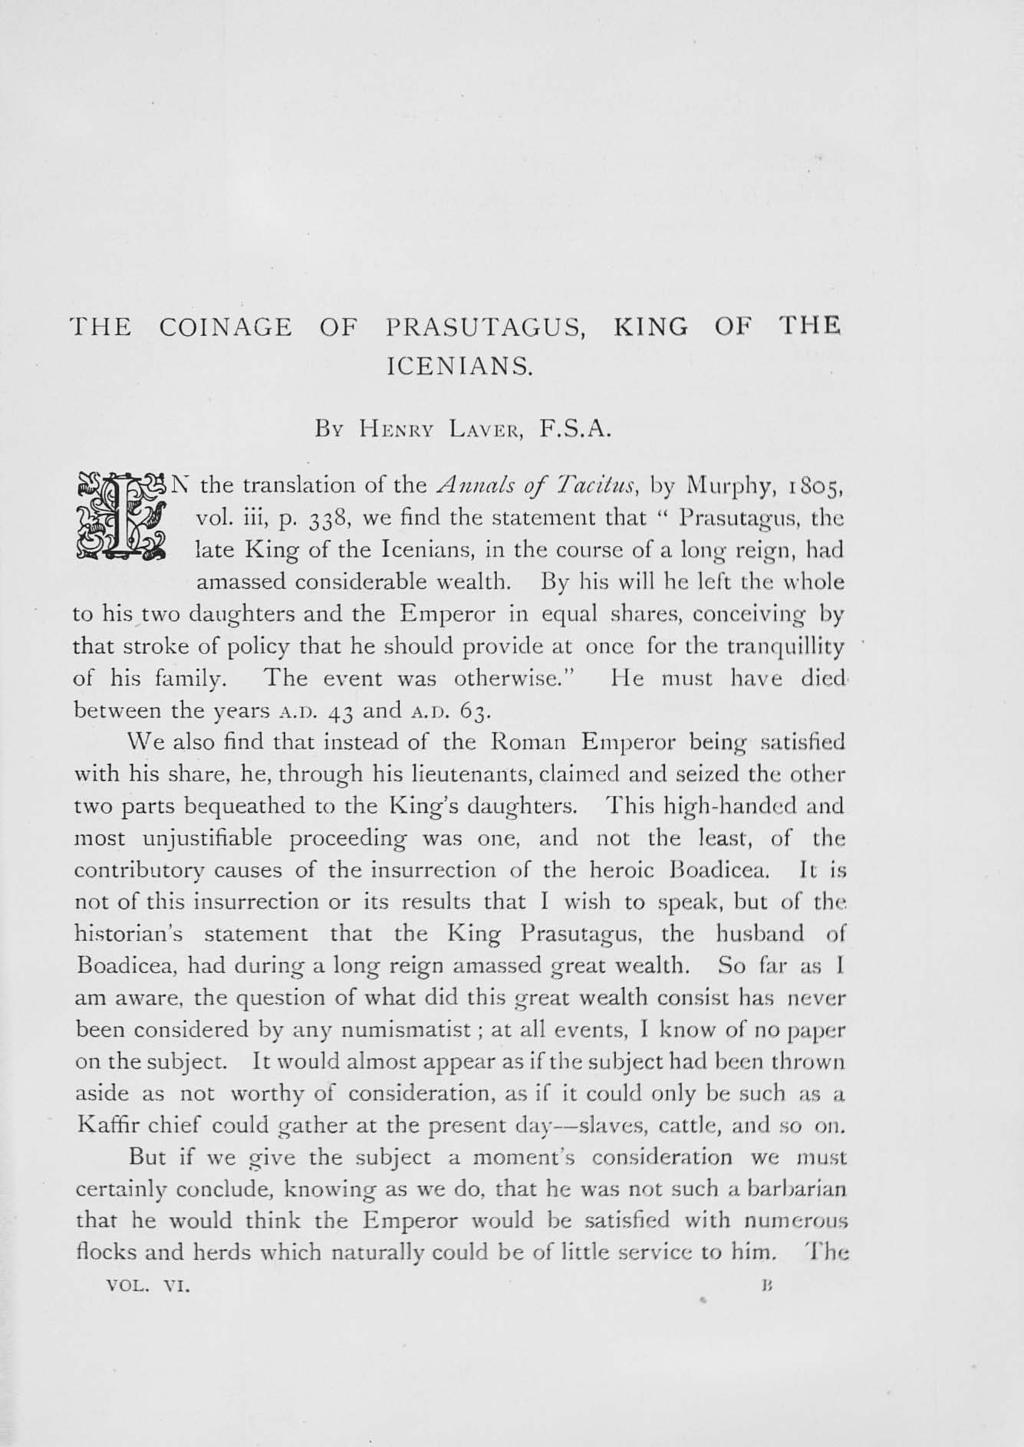 THE COINAGE OF PRASUTAGUS, KING OF THE ICENIANS. BY HENRY LAVER, F.S.A. N the translation of the Annals of Tacitus, by Murphy, 1805, vol. iii, p.